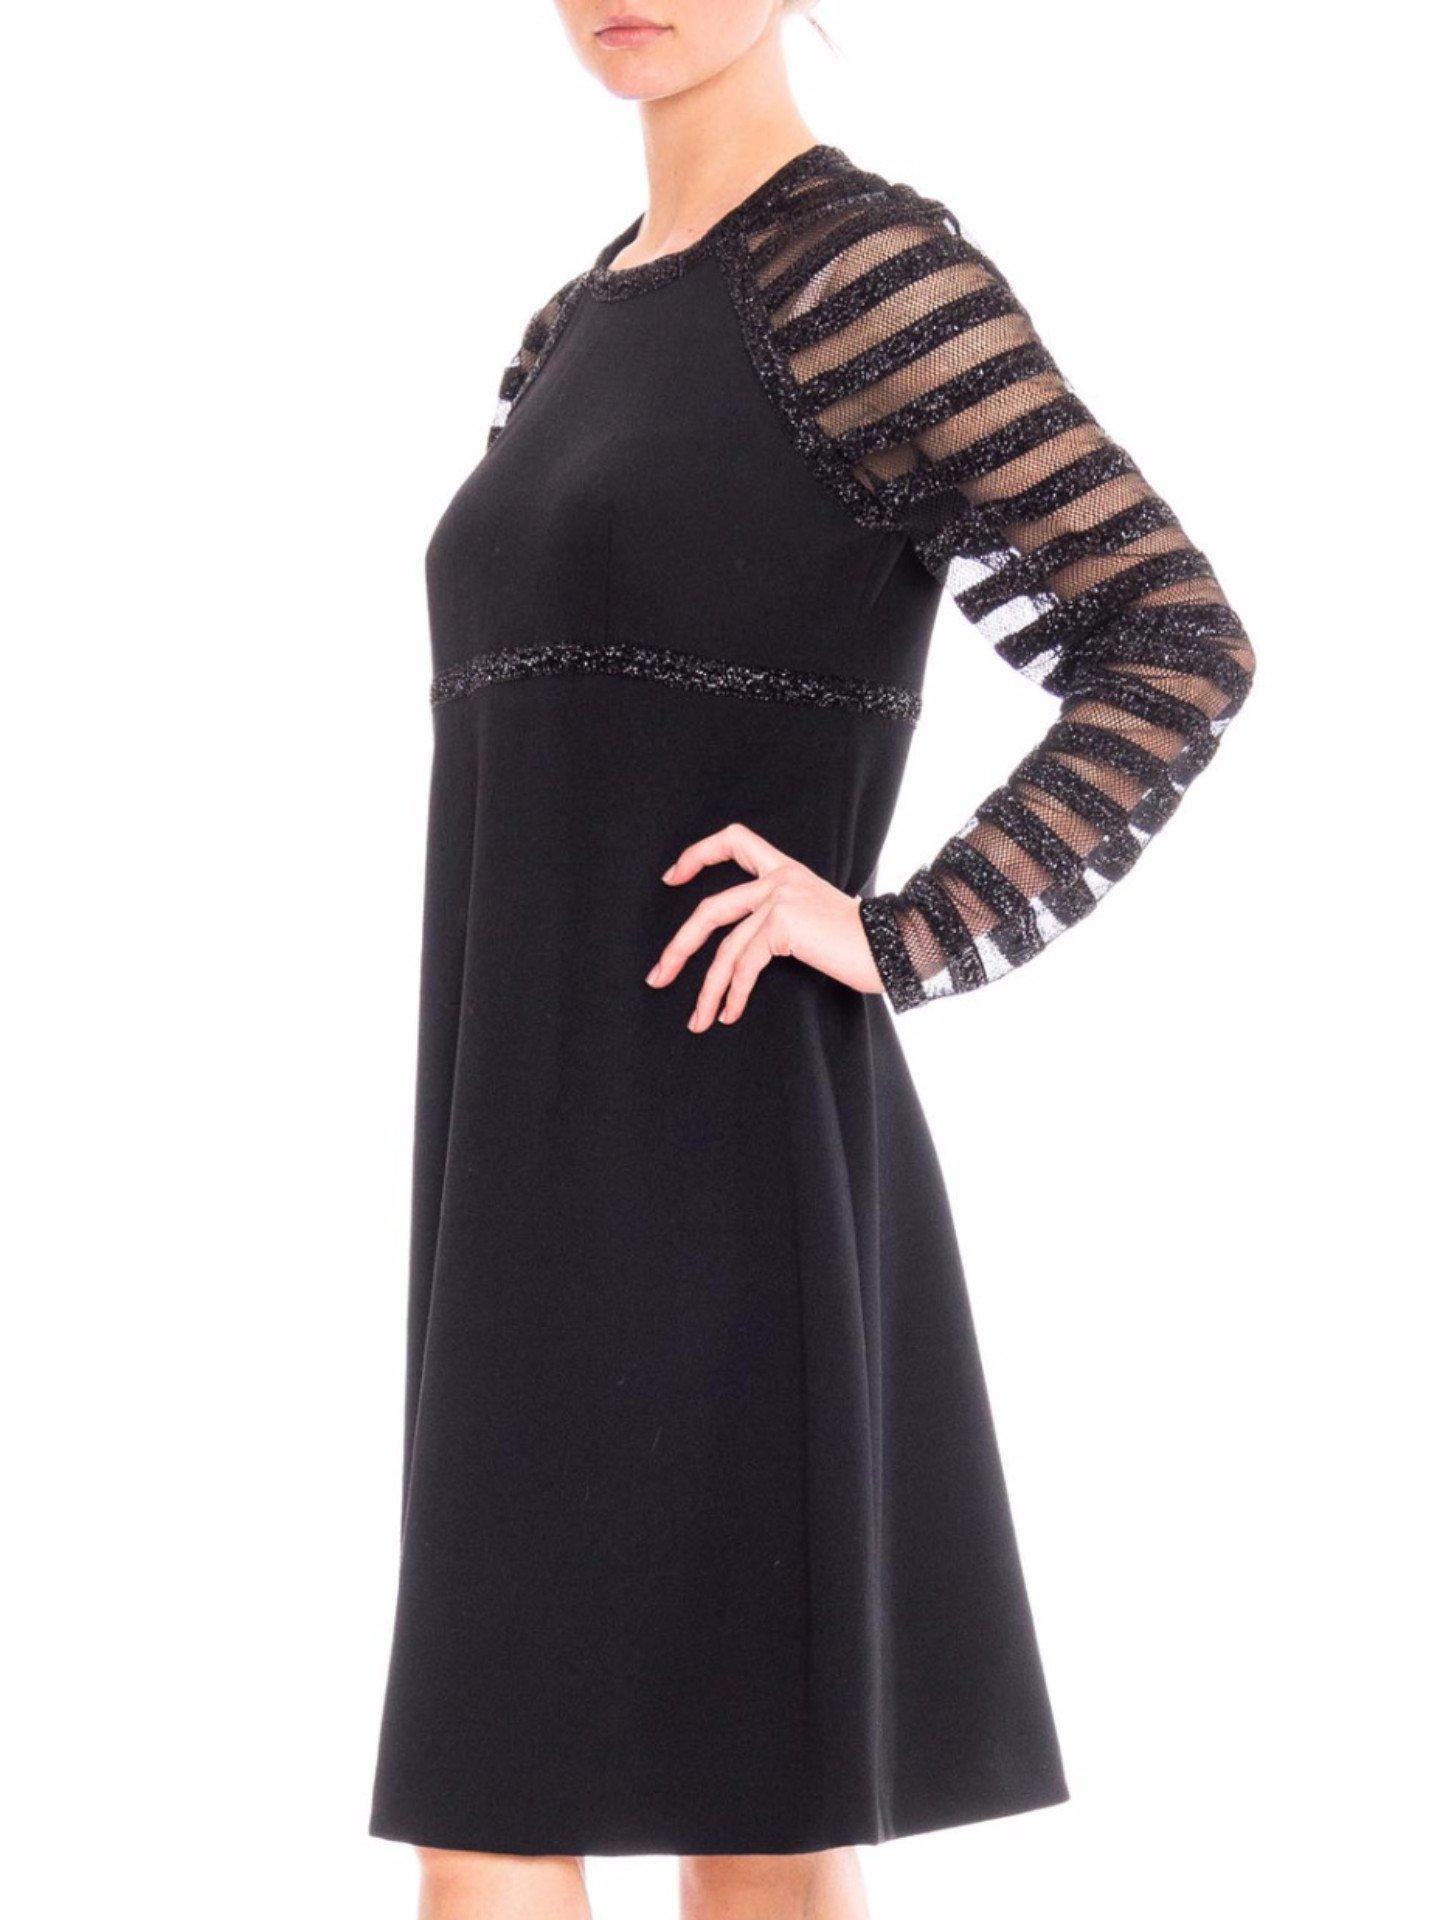 1960S JACQUELINE VANOYE Black Polyester Knit MOD Cocktail Dress With Mesh Lurex For Sale 2